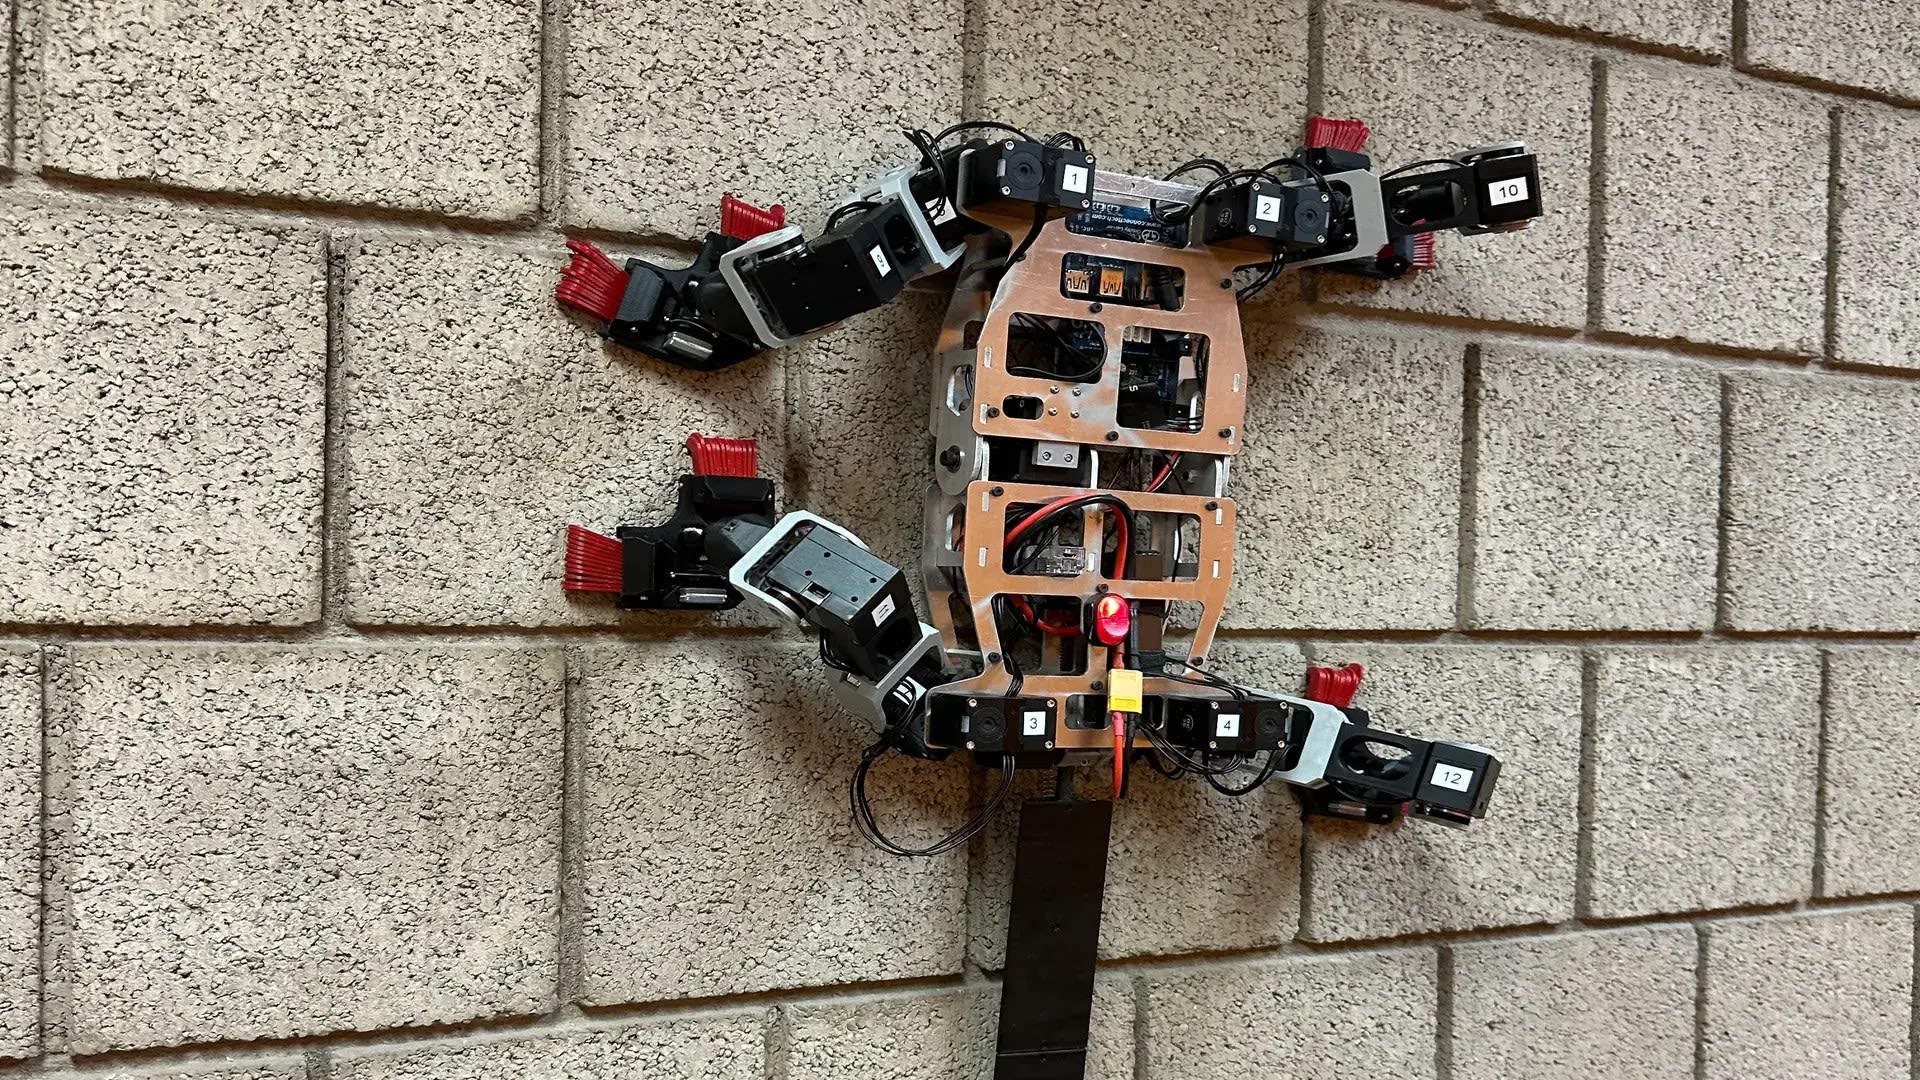 Lizard-like robot climbs walls with insect-inspired passive grippers